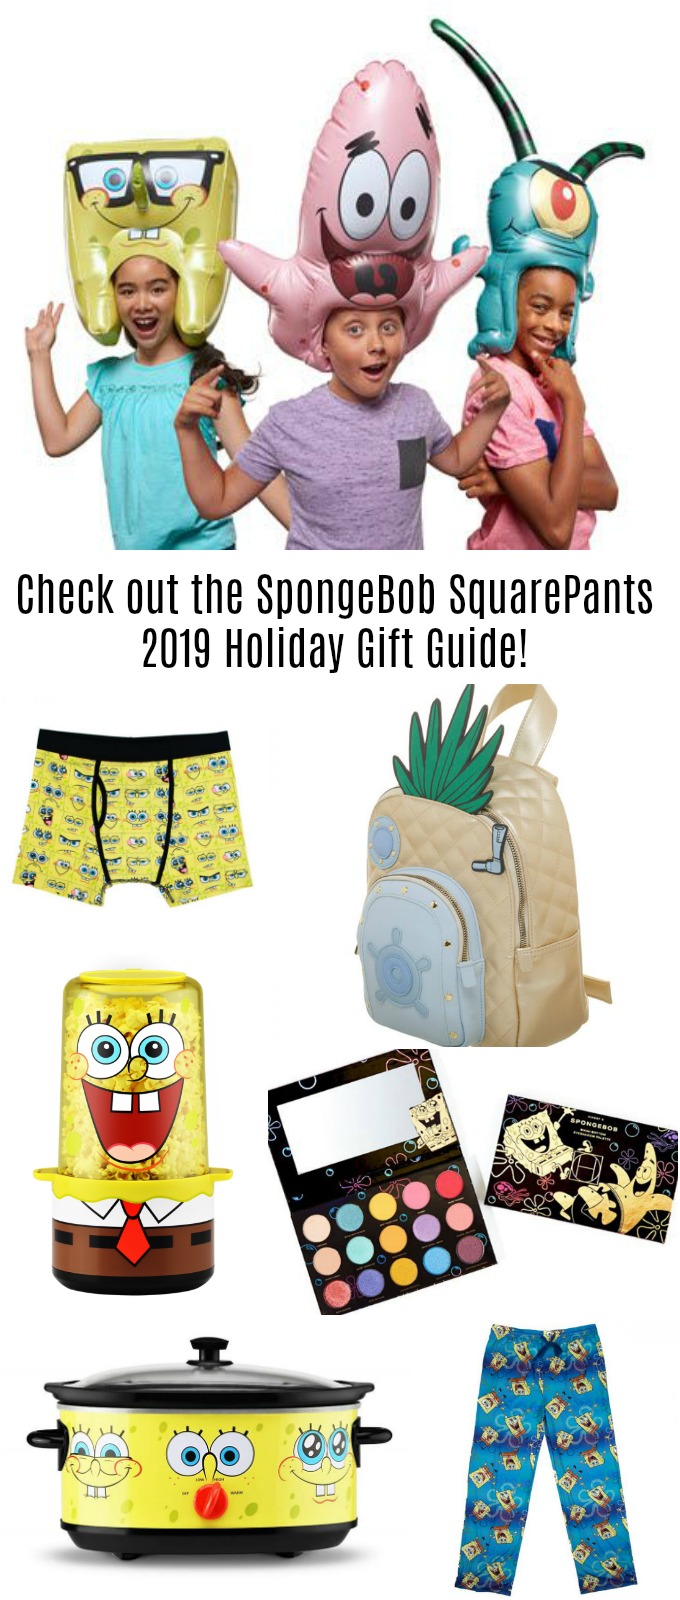 Check out the SpongeBob SquarePants 2019 Holiday Gift Guide!